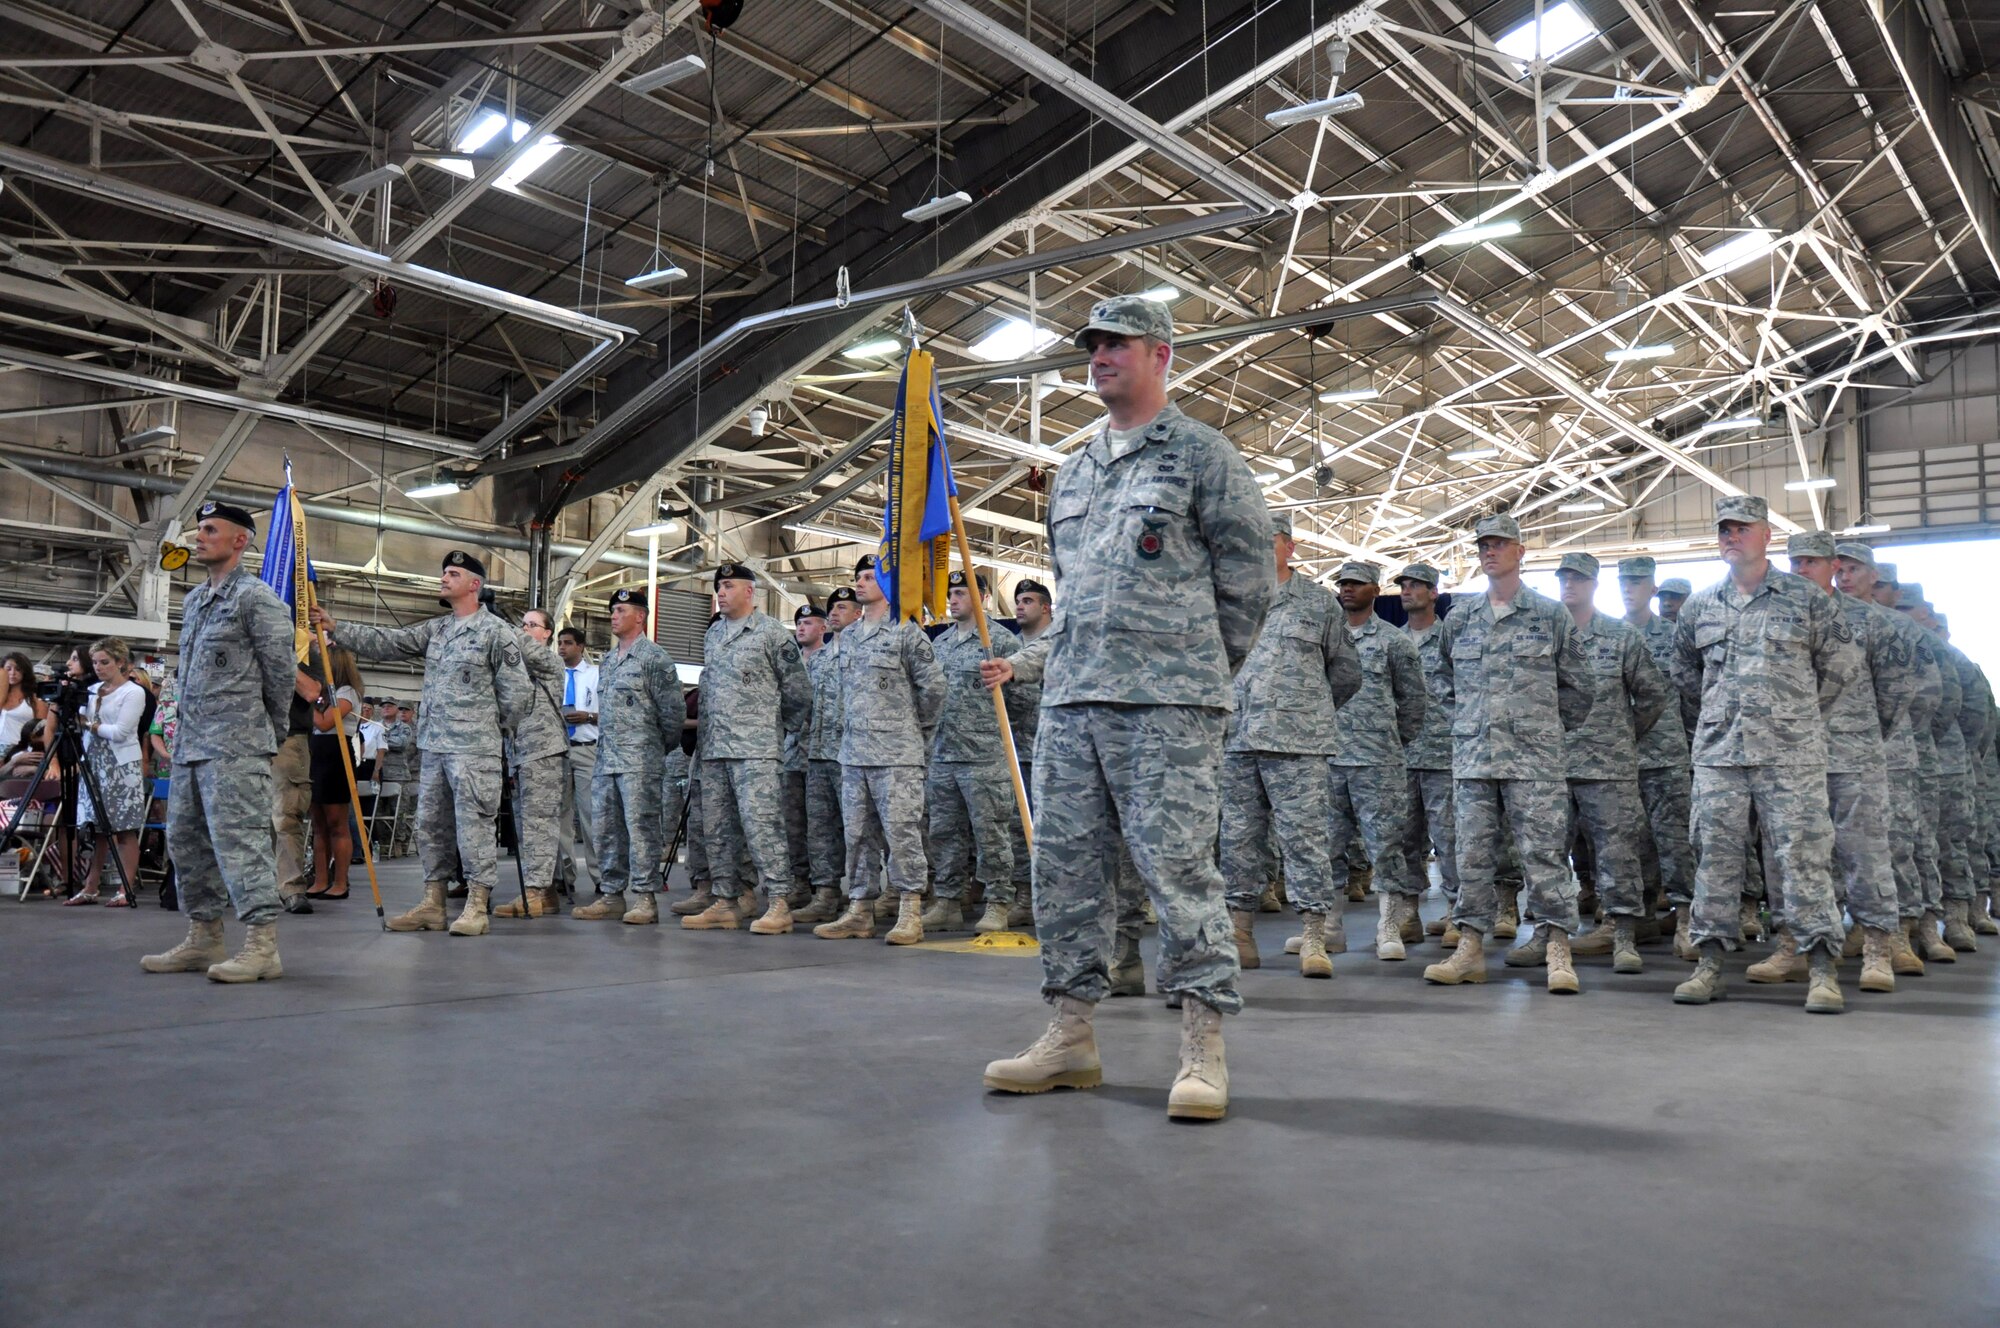 Lt. Col. James Works (front right), commander of the 103rd Civil Engineer Squadron and Capt. Andrew Nemeth (far left front), who will command the  deployed 103rd Security Forces Squadron, stand at ease as their respective units stand behind them during a Send-Off Ceremony at Bradley Air National Guard Base, East Granby, Conn. July 6, 2011. The two commanders will lead their troops in overseas contingency operations in support of Operation Enduring Freedom. (U.S. Air Force photo by Army 2nd  Lt. Emily Hein)